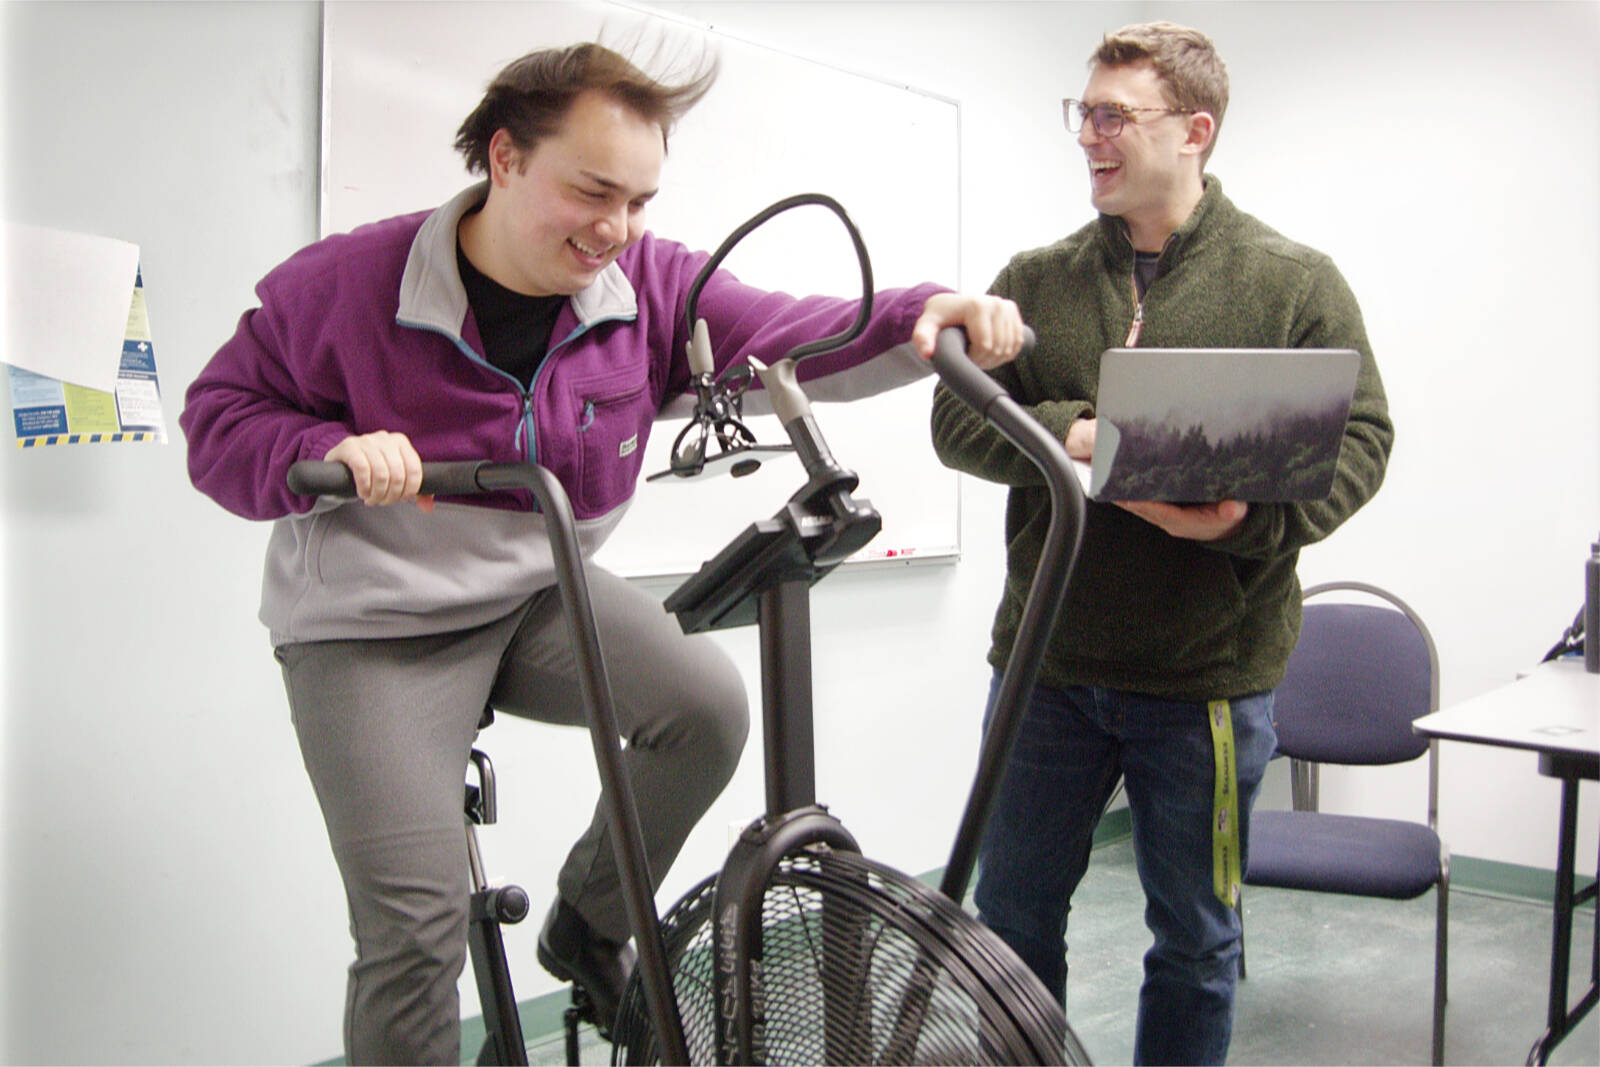 Research assistant Andrew Szilogyi whips up some wind on a stationary air-resistance bike while psychology student Derek LeBaron enters notes on his laptop computer at Vancouver Island University. LeBaron is researching how various forms of social support impact exercise performance. (Chris Bush/News Bulletin)